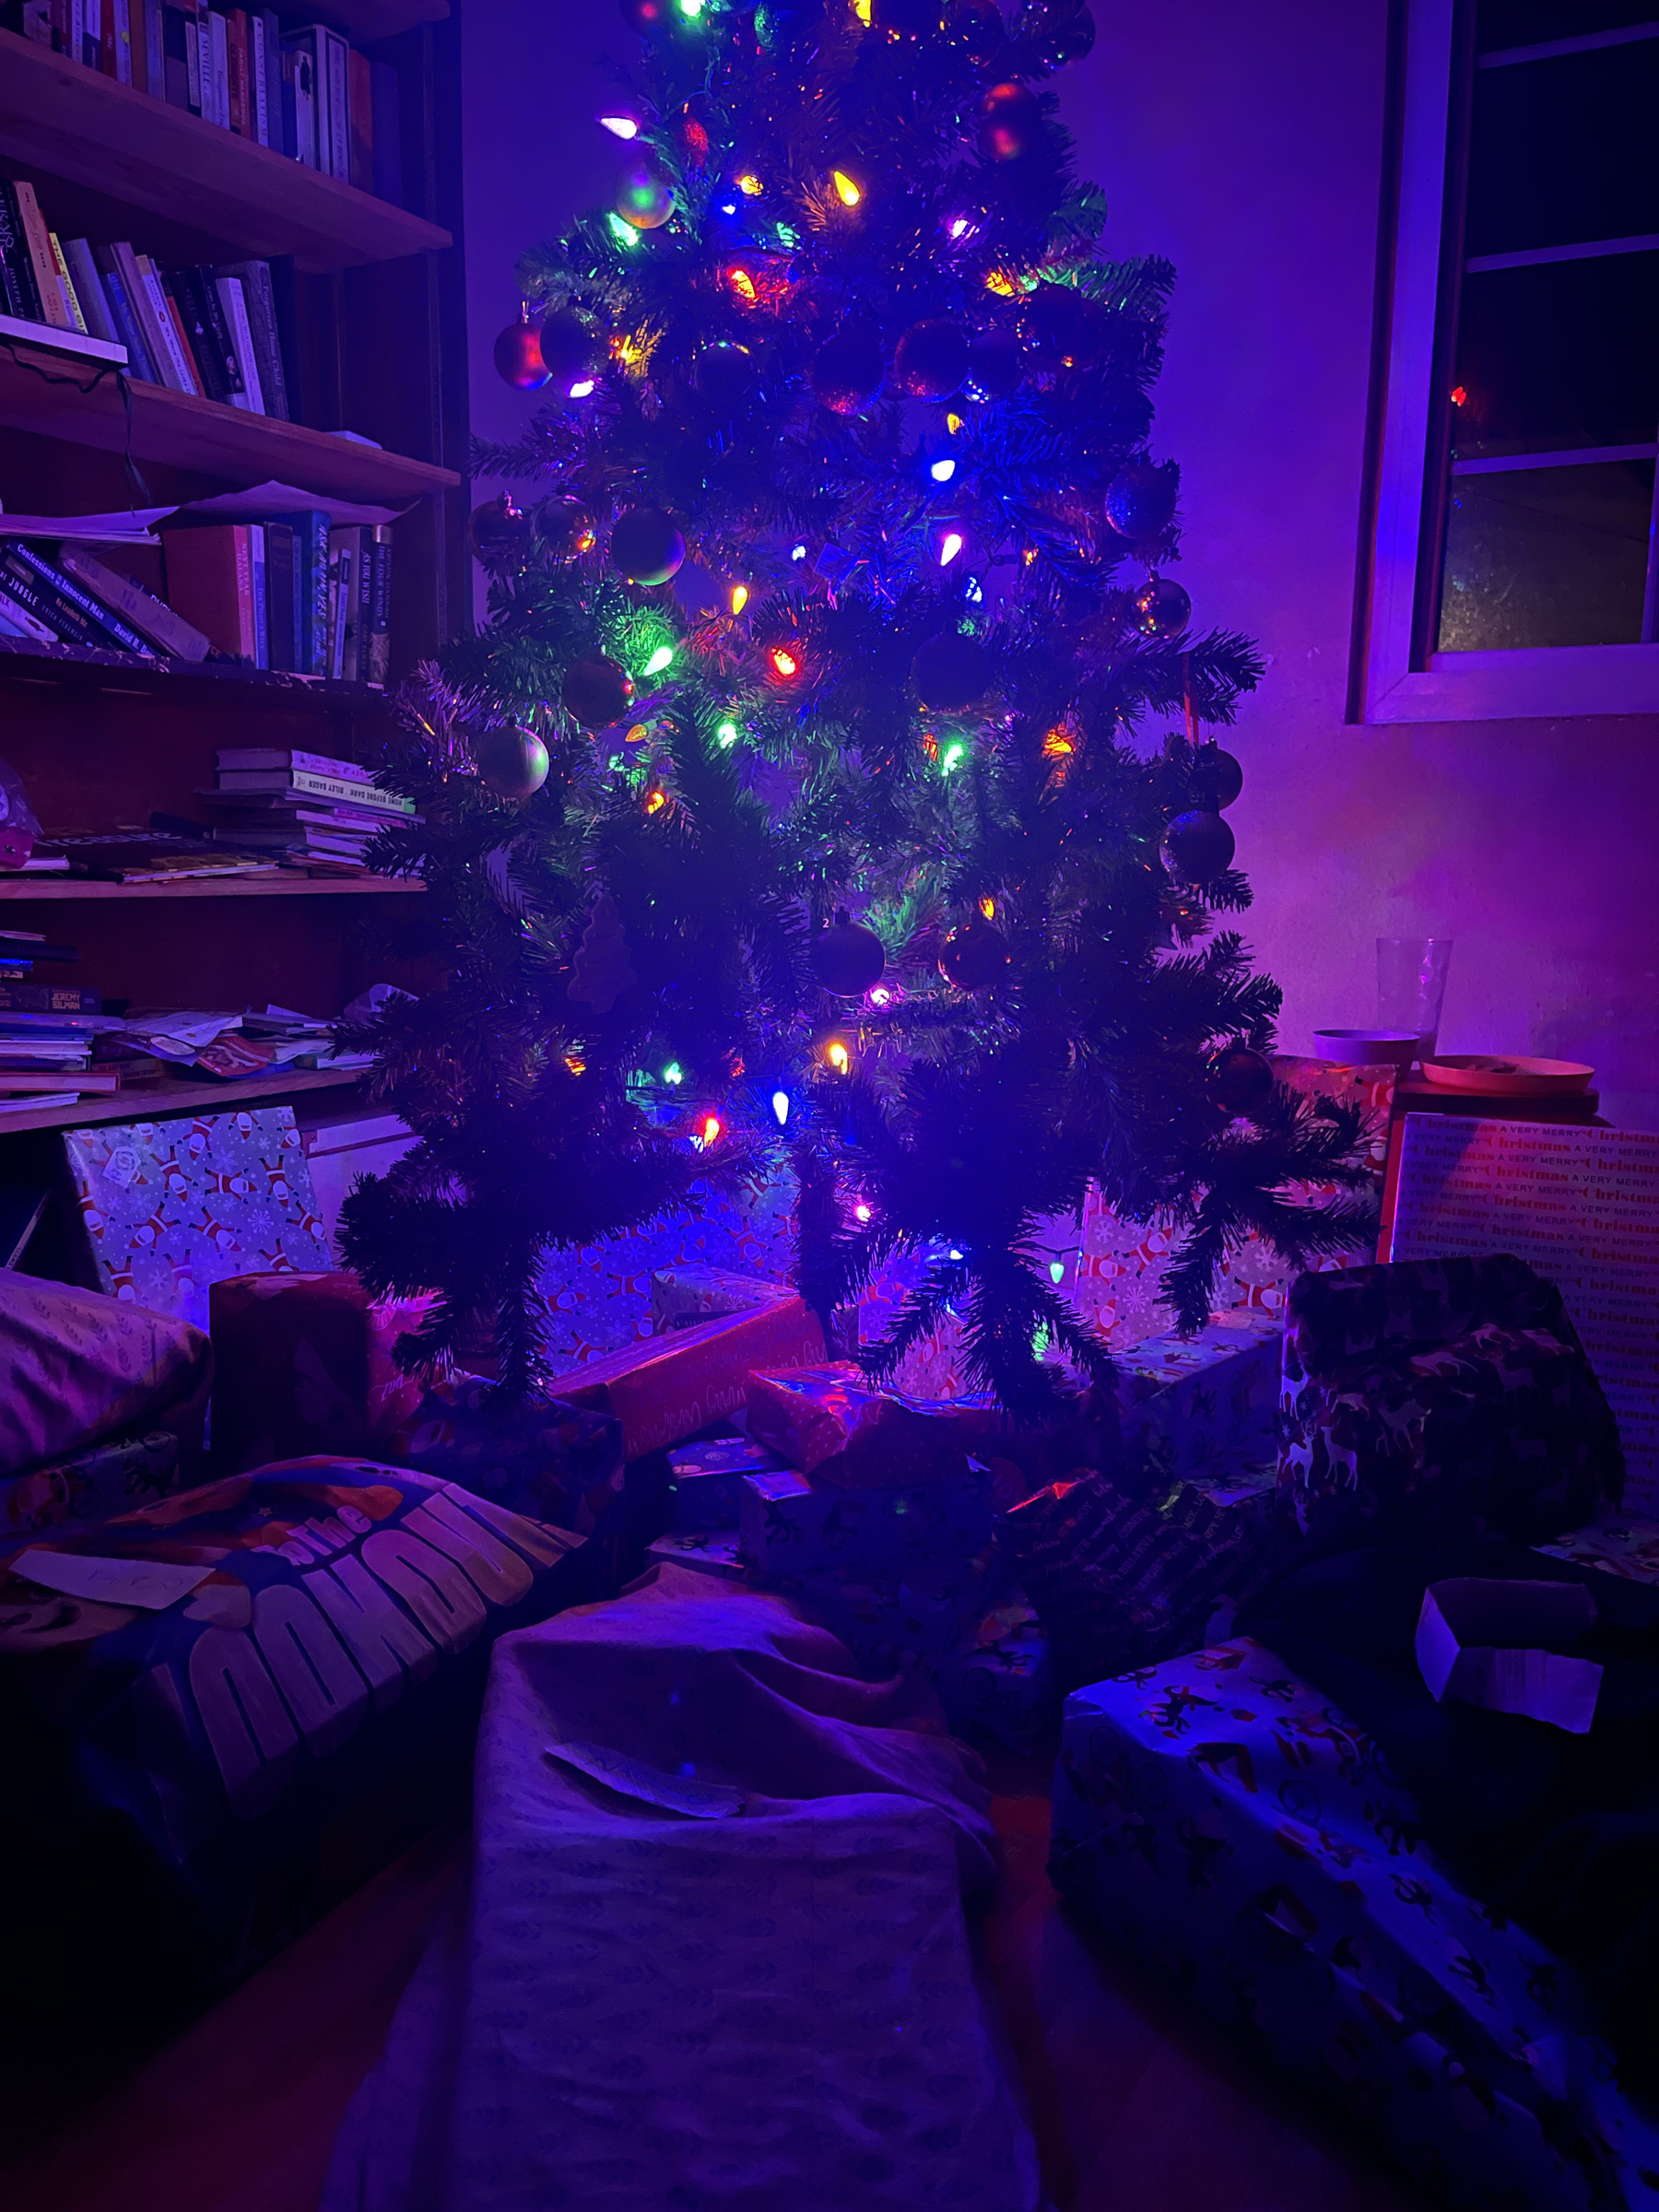 Christmas tree in the dark with lights, full of presents underneath